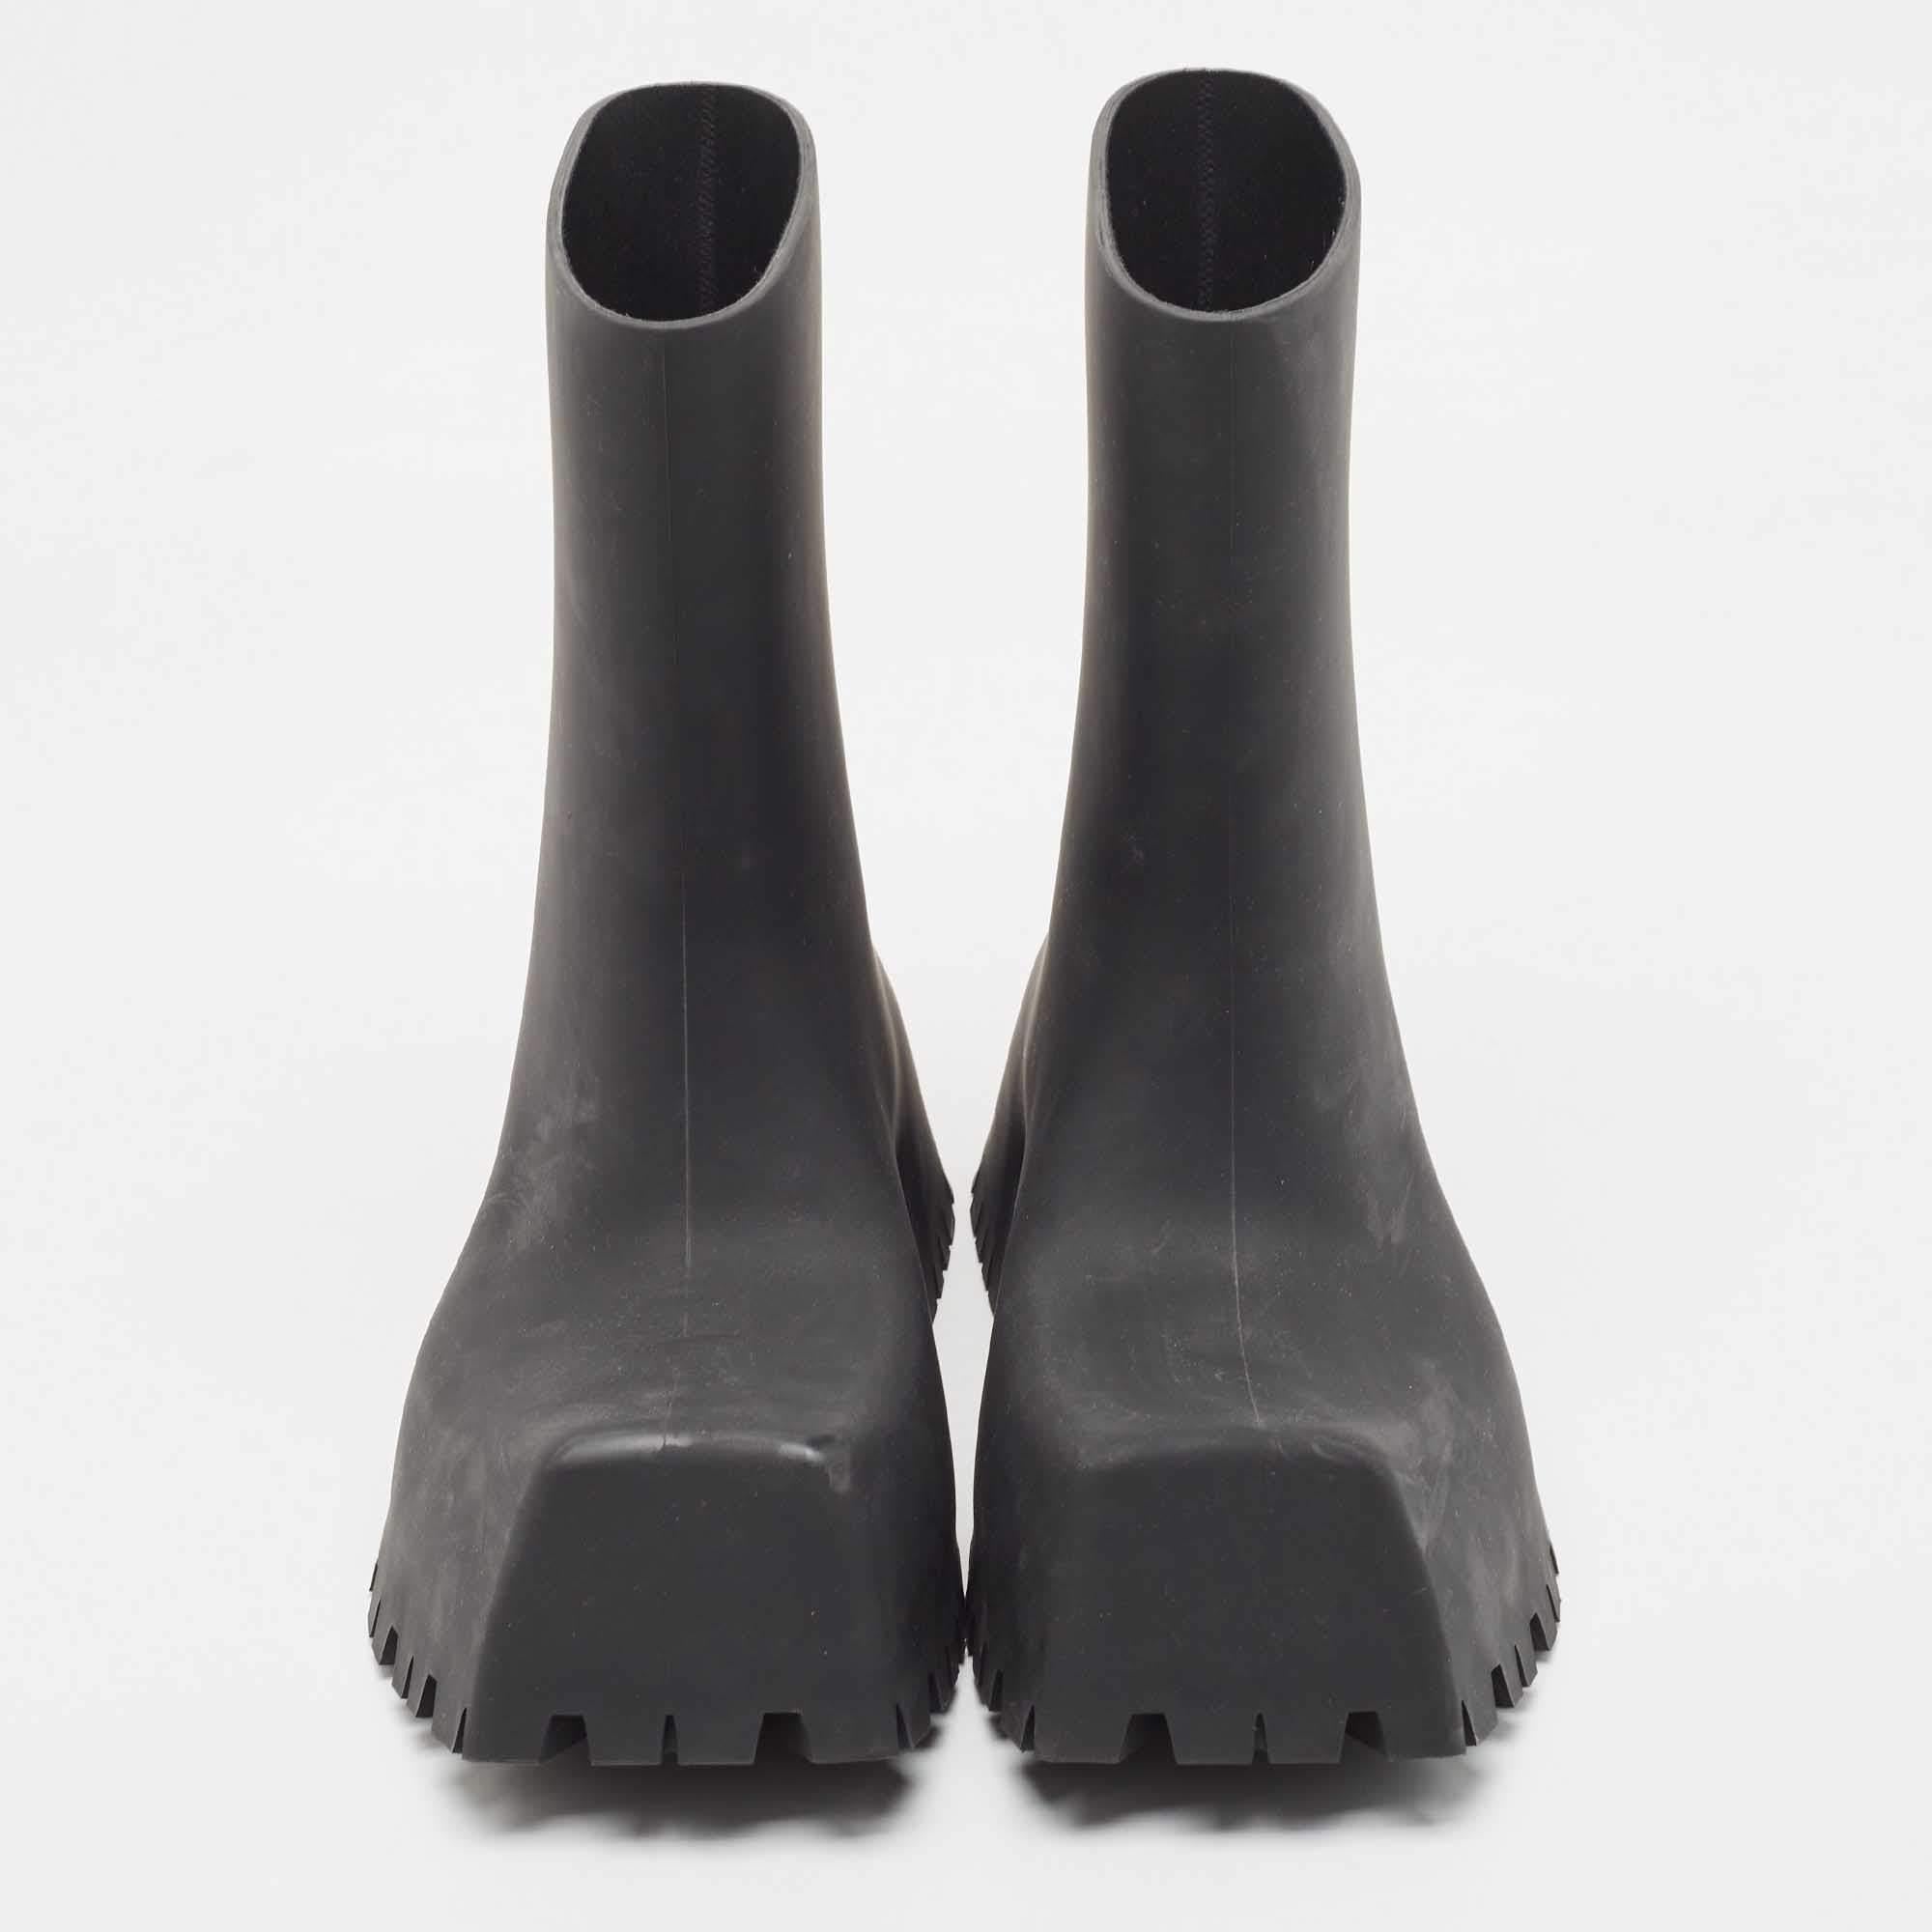 Enjoy the most fashionable days with these Balenciaga rubber Trooper boots. Modern in design and craftsmanship, they are fashioned to keep you comfortable and chic!

Includes
Original Dustbag, Original Bo